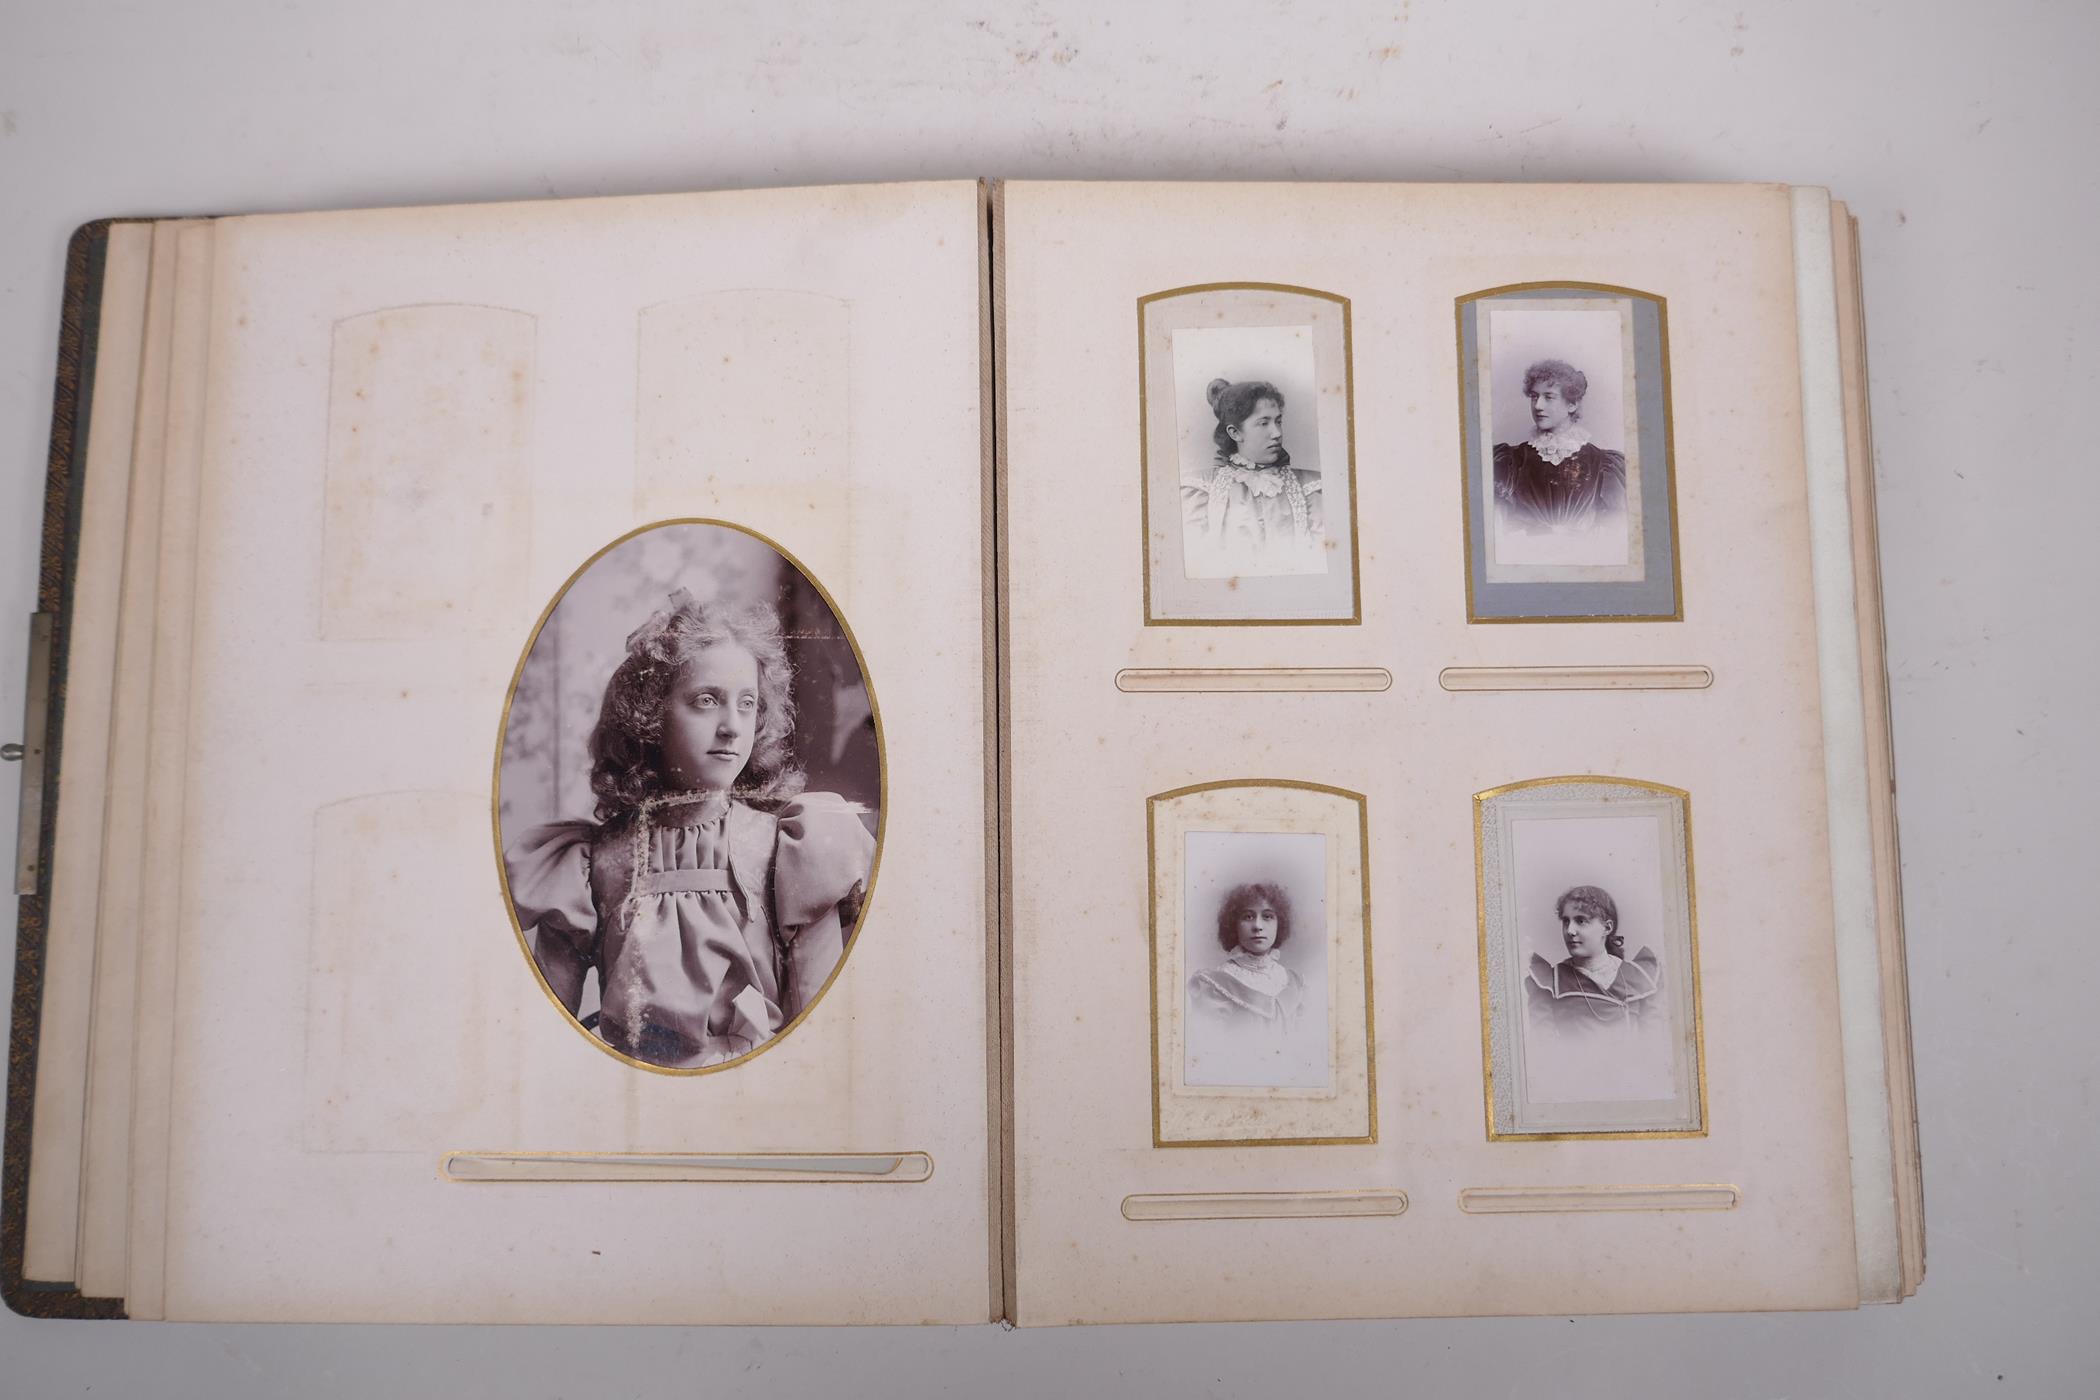 A late C19th/early C20th German leather bound photograph album containing portrait photos from the - Image 2 of 7